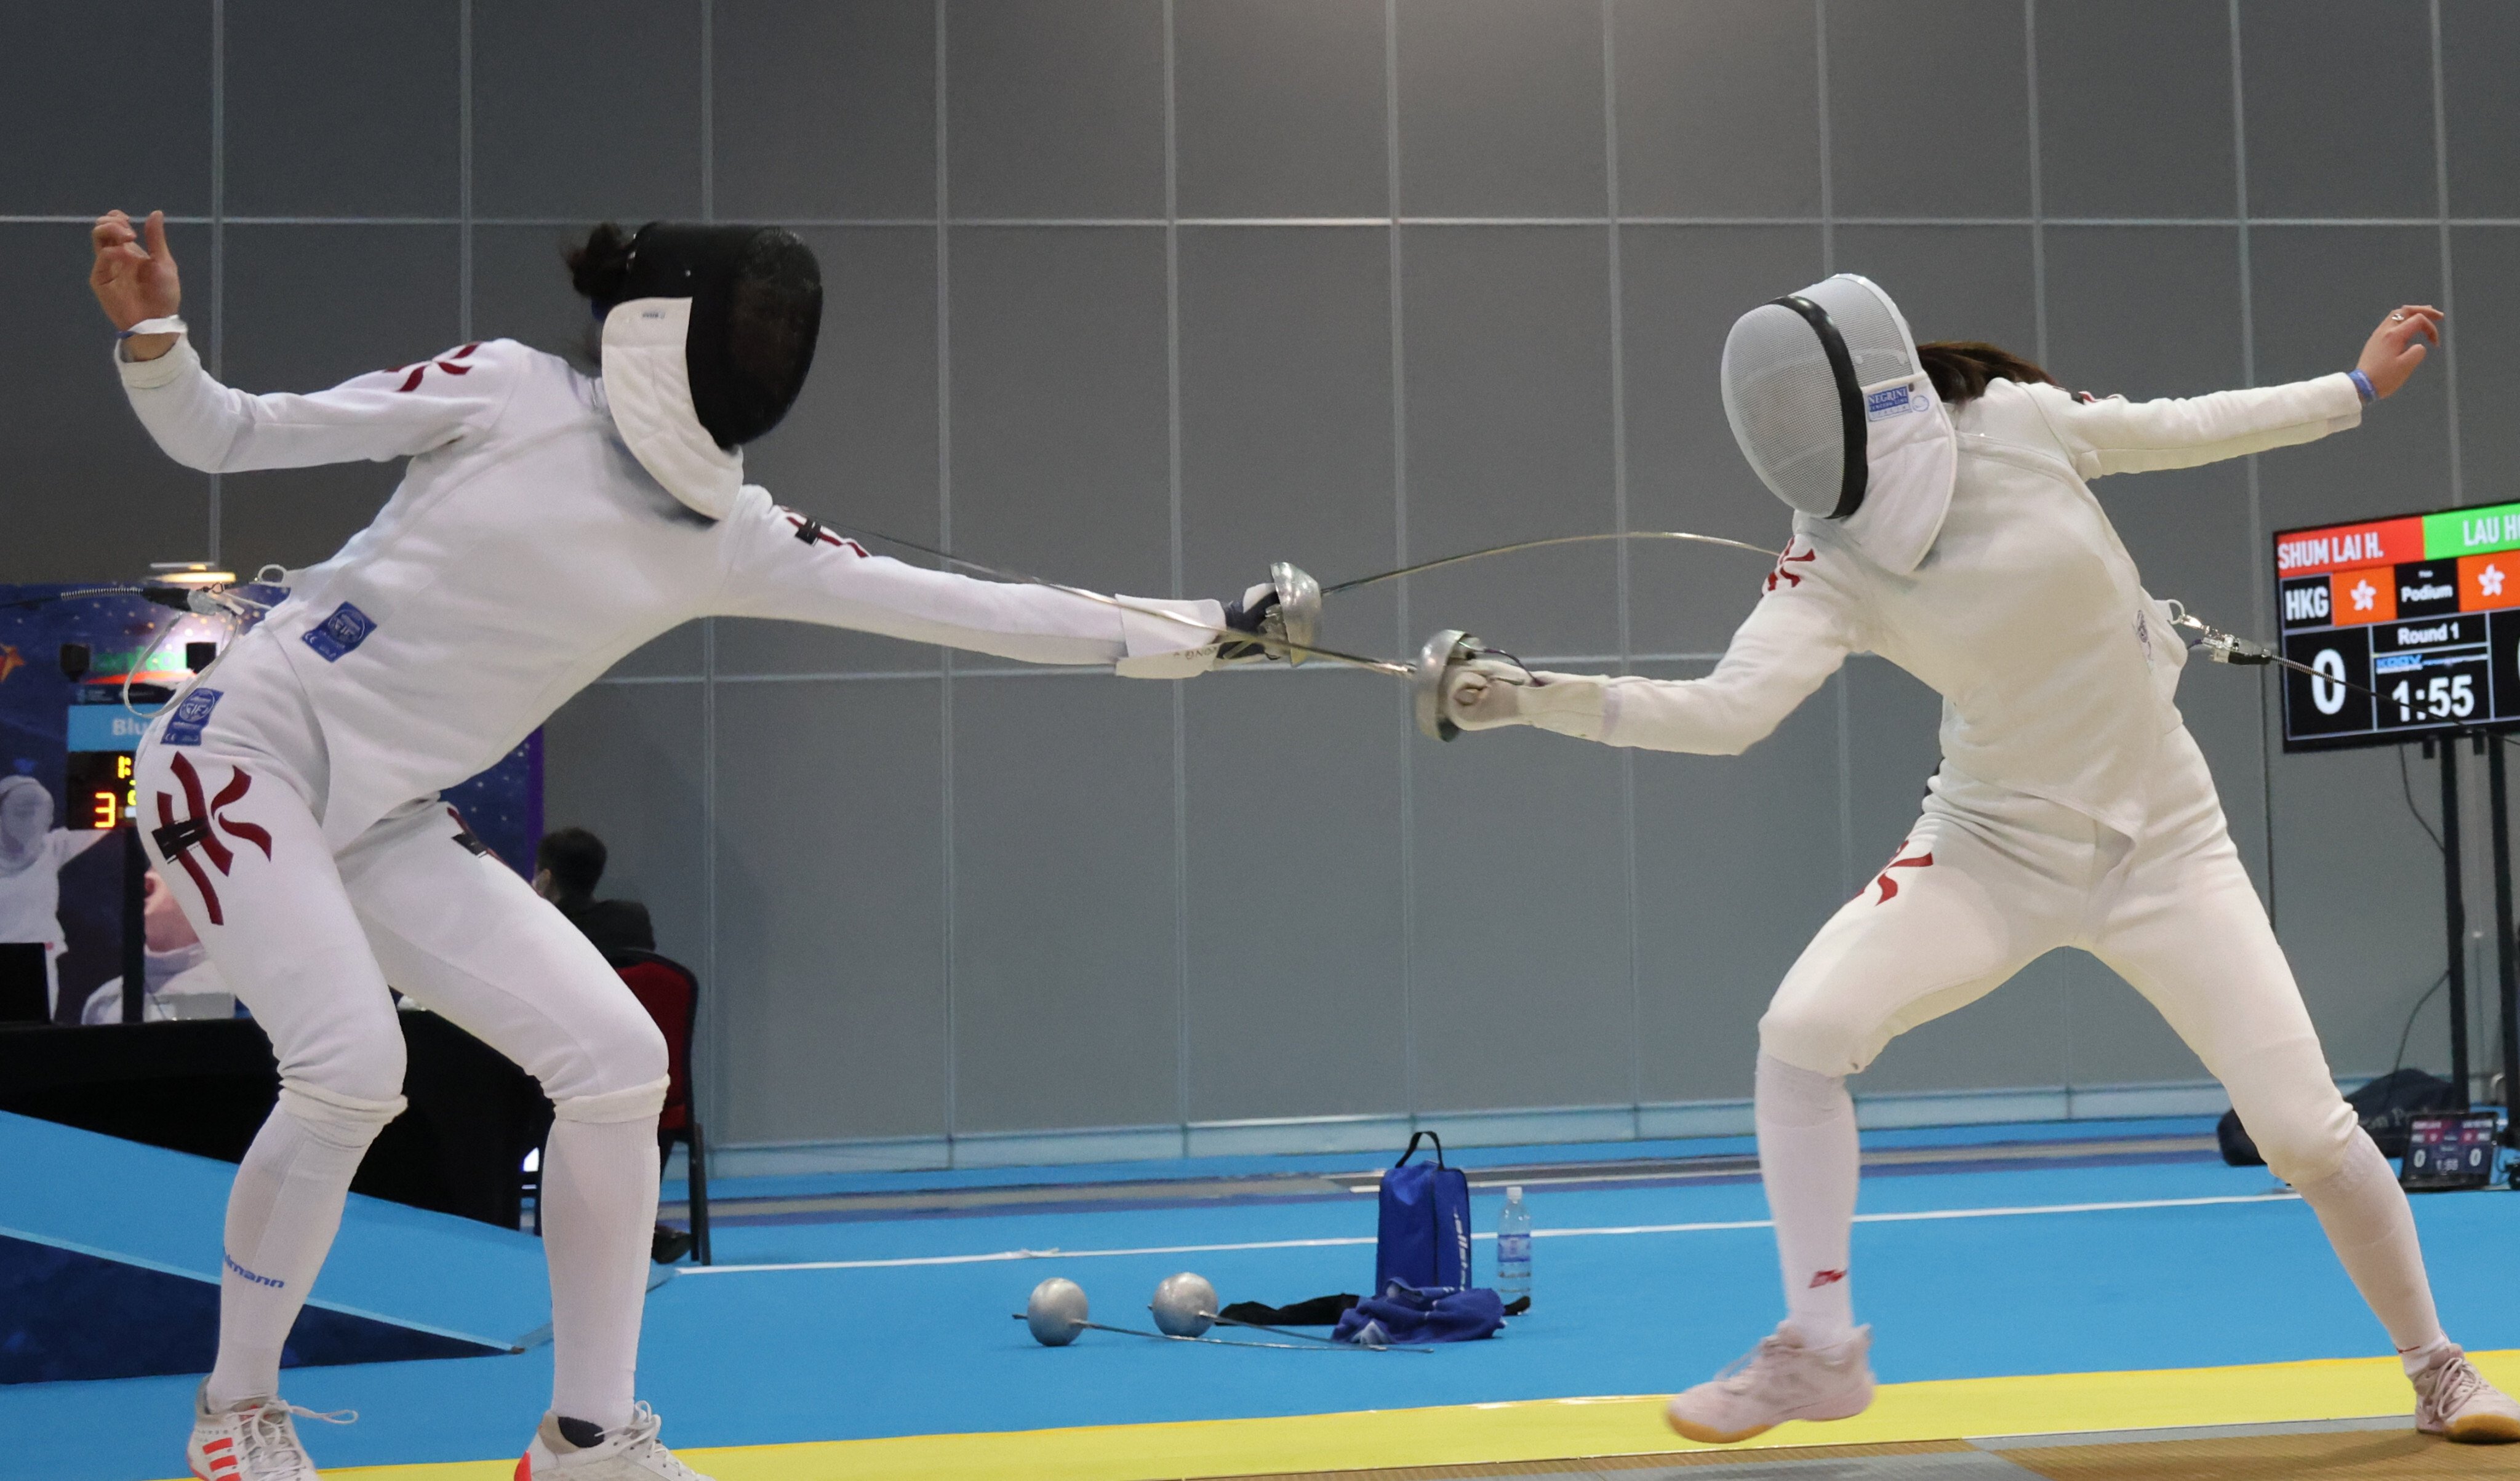 Hong Kong women’s epee fencer Vivian Kong Man-wai (left) in a game against Chan Wai-ling in the women’s epee event at Hong Kong Open Fencing at the AsiaWorld-Expo. Photo: SCMP / May Tse   